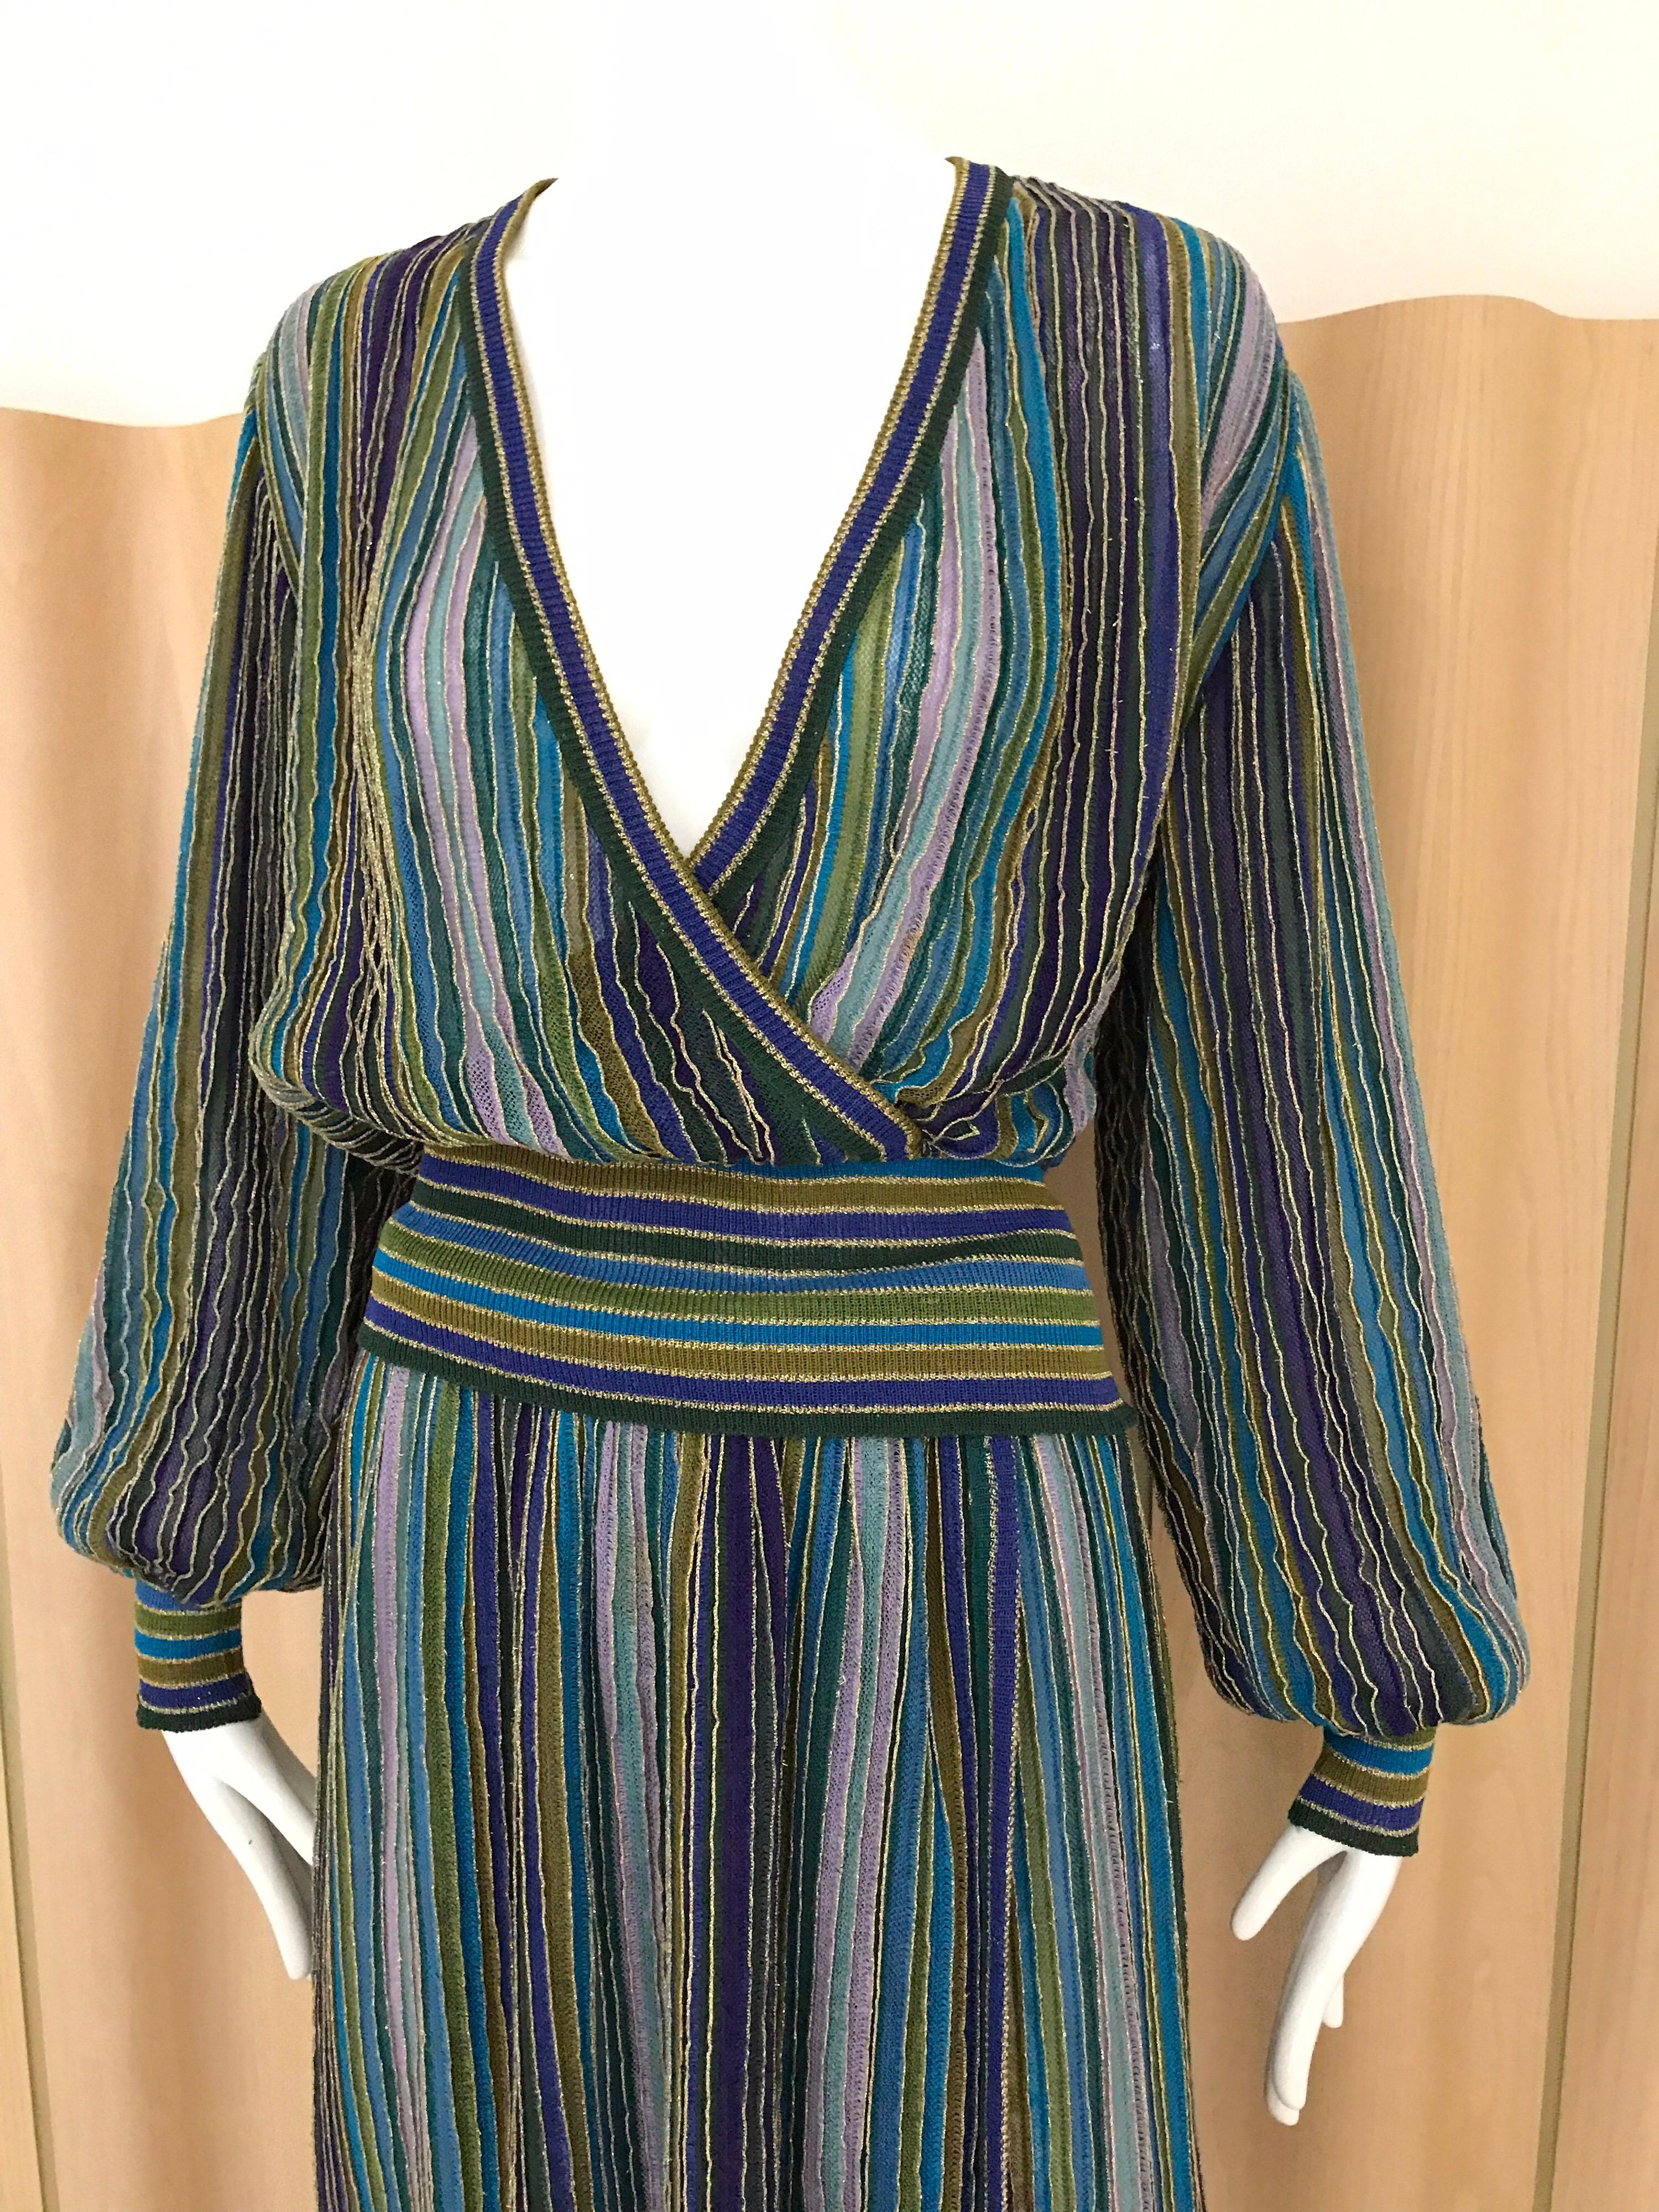 Women's  1980s Missoni Teal blue and Purple Metallic Knit Long Sleeve Top and Skirt set